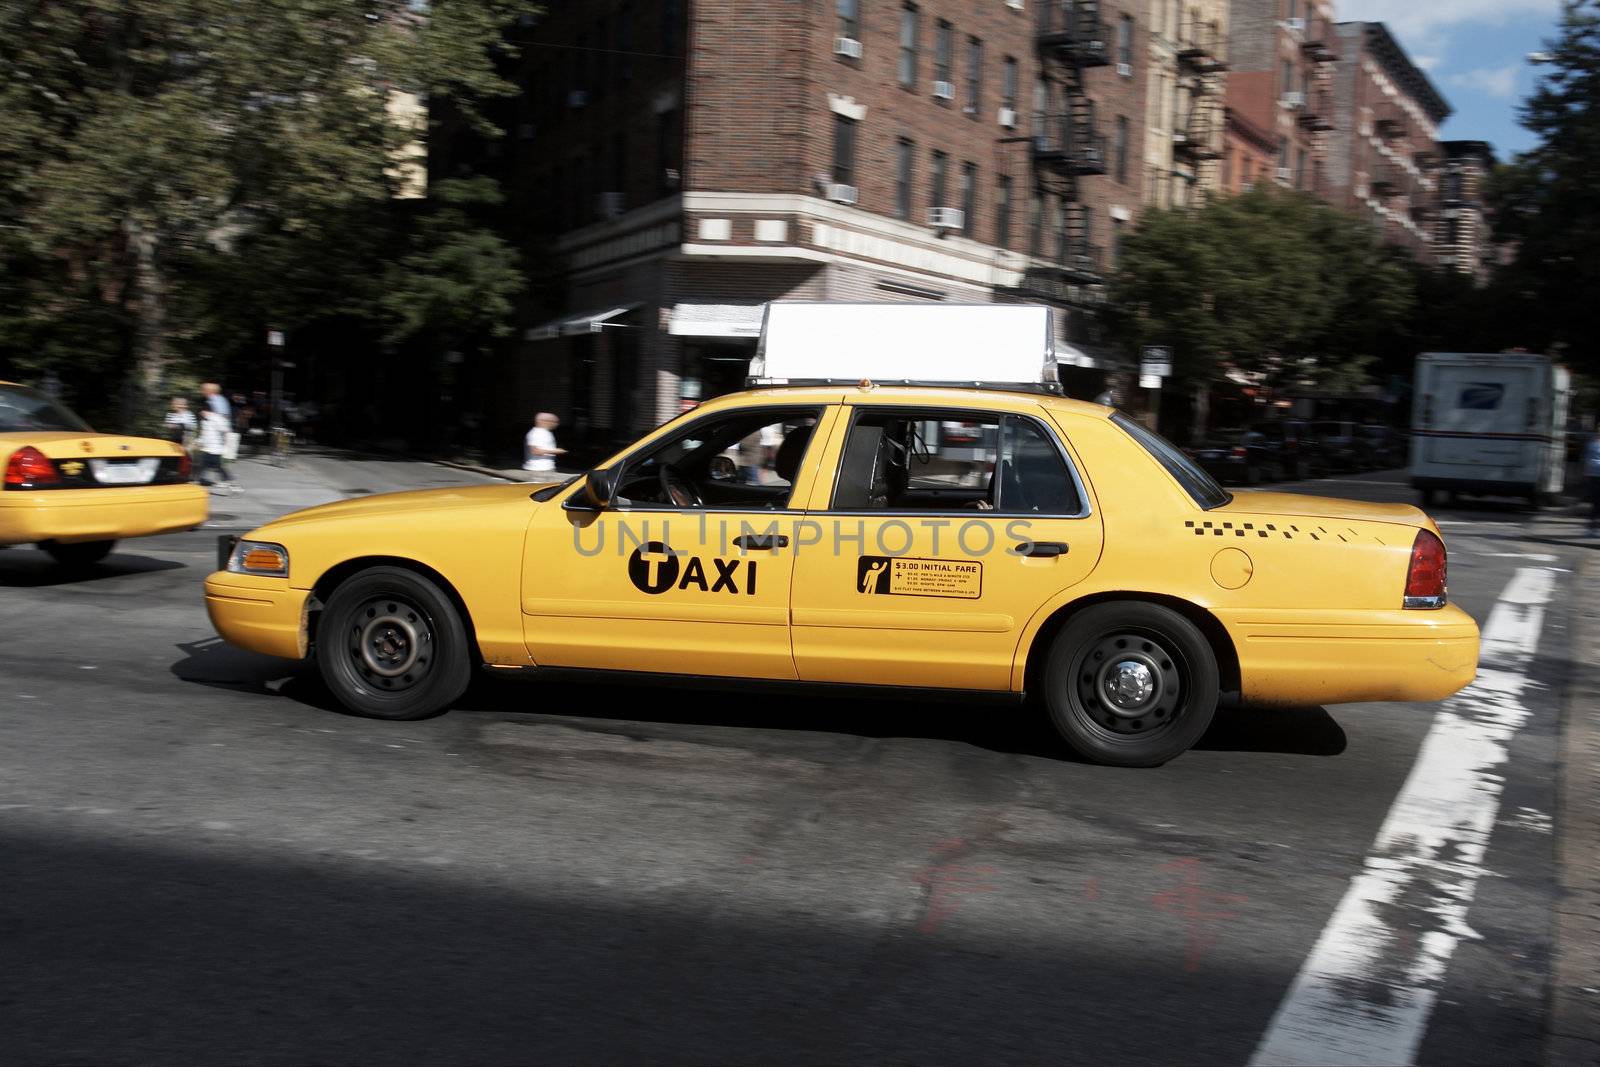 New York, Usa - Sep 18th, 2010: New York Taxi driving in Chelsea, Manhattan, NYC. With antique buildings on the background.

Yellow taxi billboard with clipping path. Crowded with commercial signs, there is intense competition for attention in Chelsea, New York City
